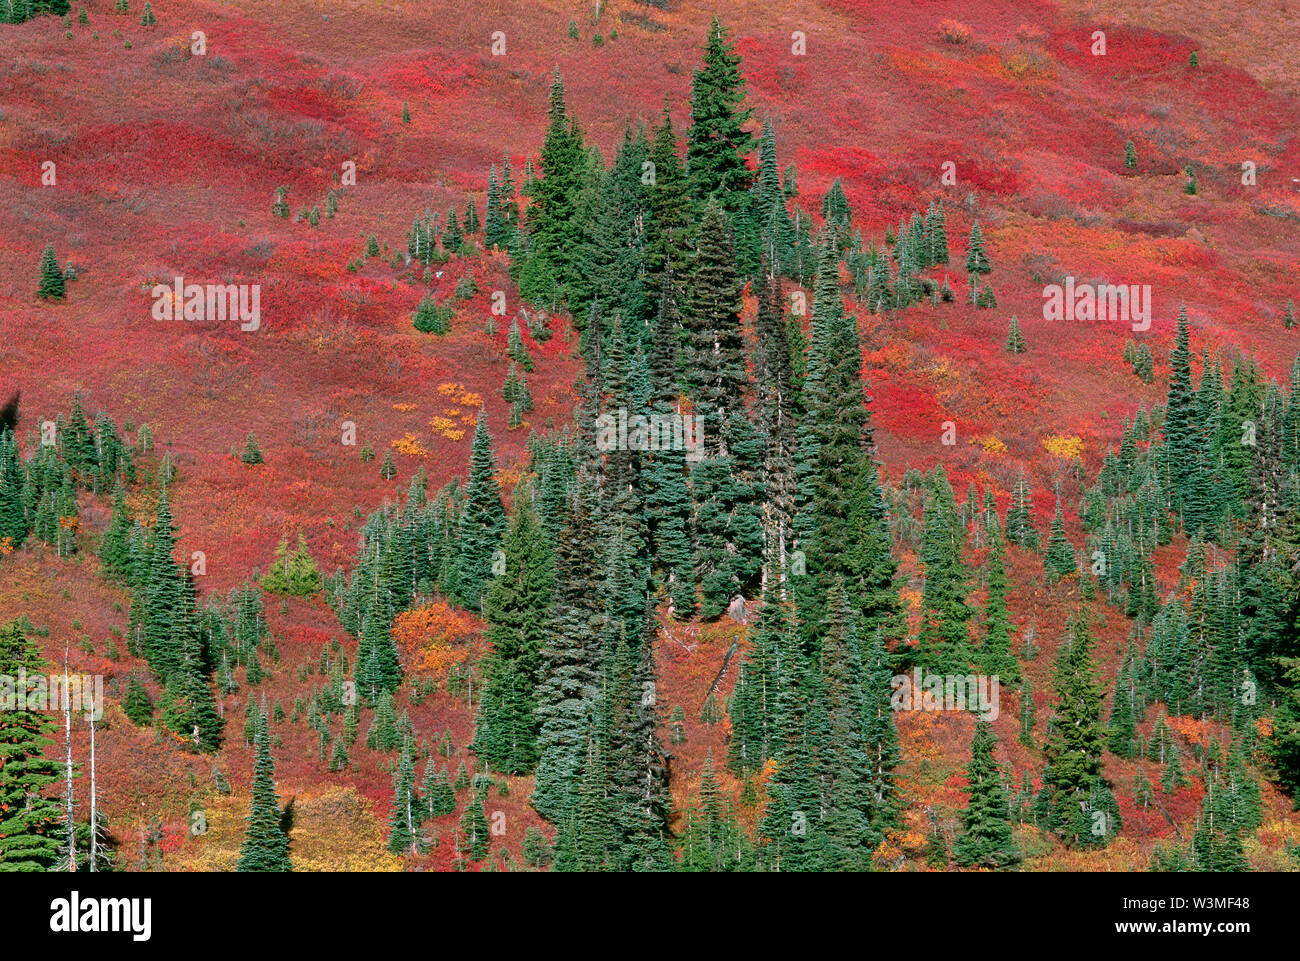 USA, Washington, Mt. Rainier National Park, Shrubs; primarily huckleberry, blueberry and mountain ash, display fall color among scattered conifers. Stock Photo